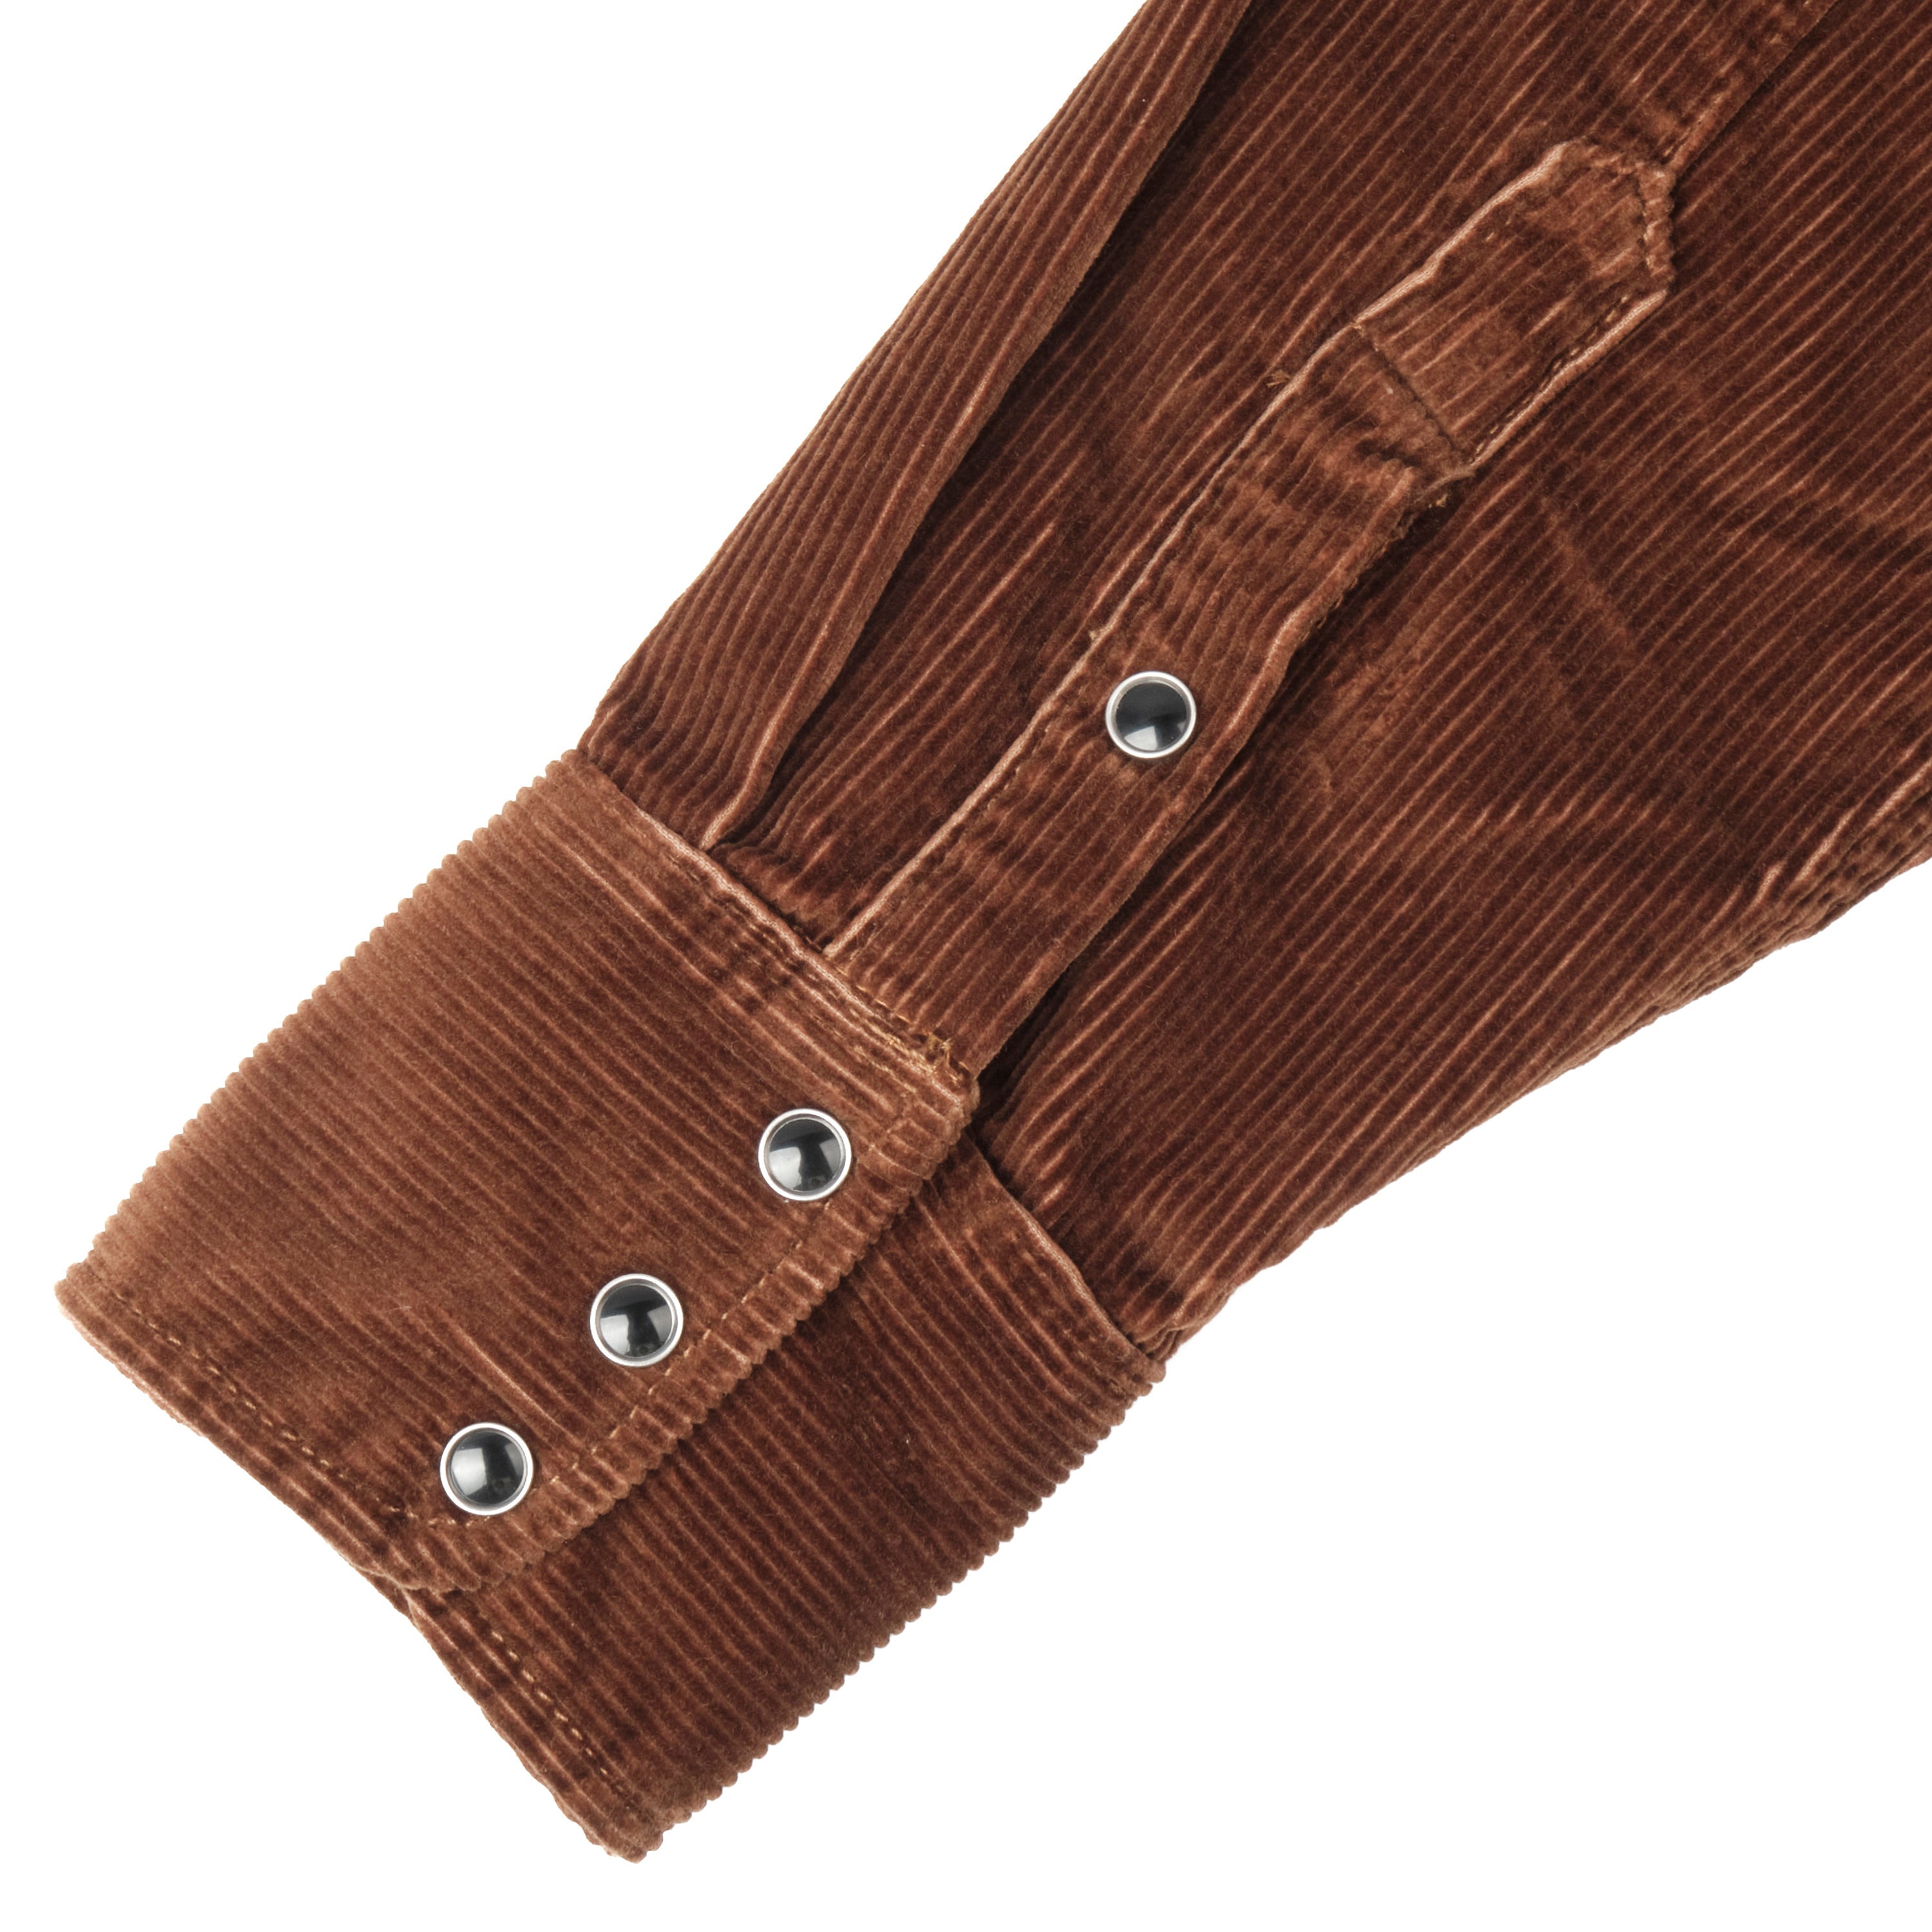 Calico in Brown Corduroy